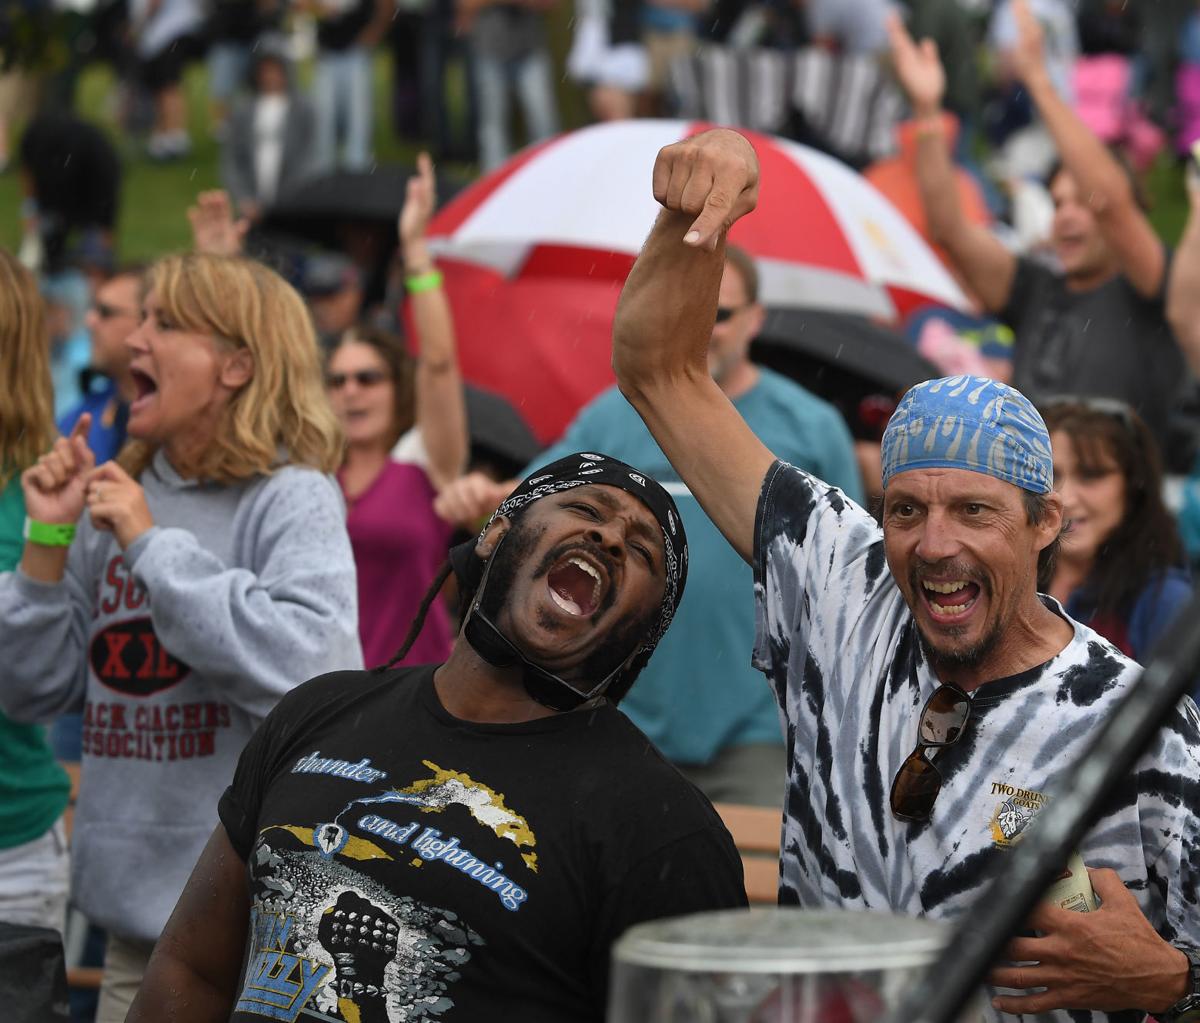 Rain dampens crowds, but not enthusiasm, at Tribute Island Local News